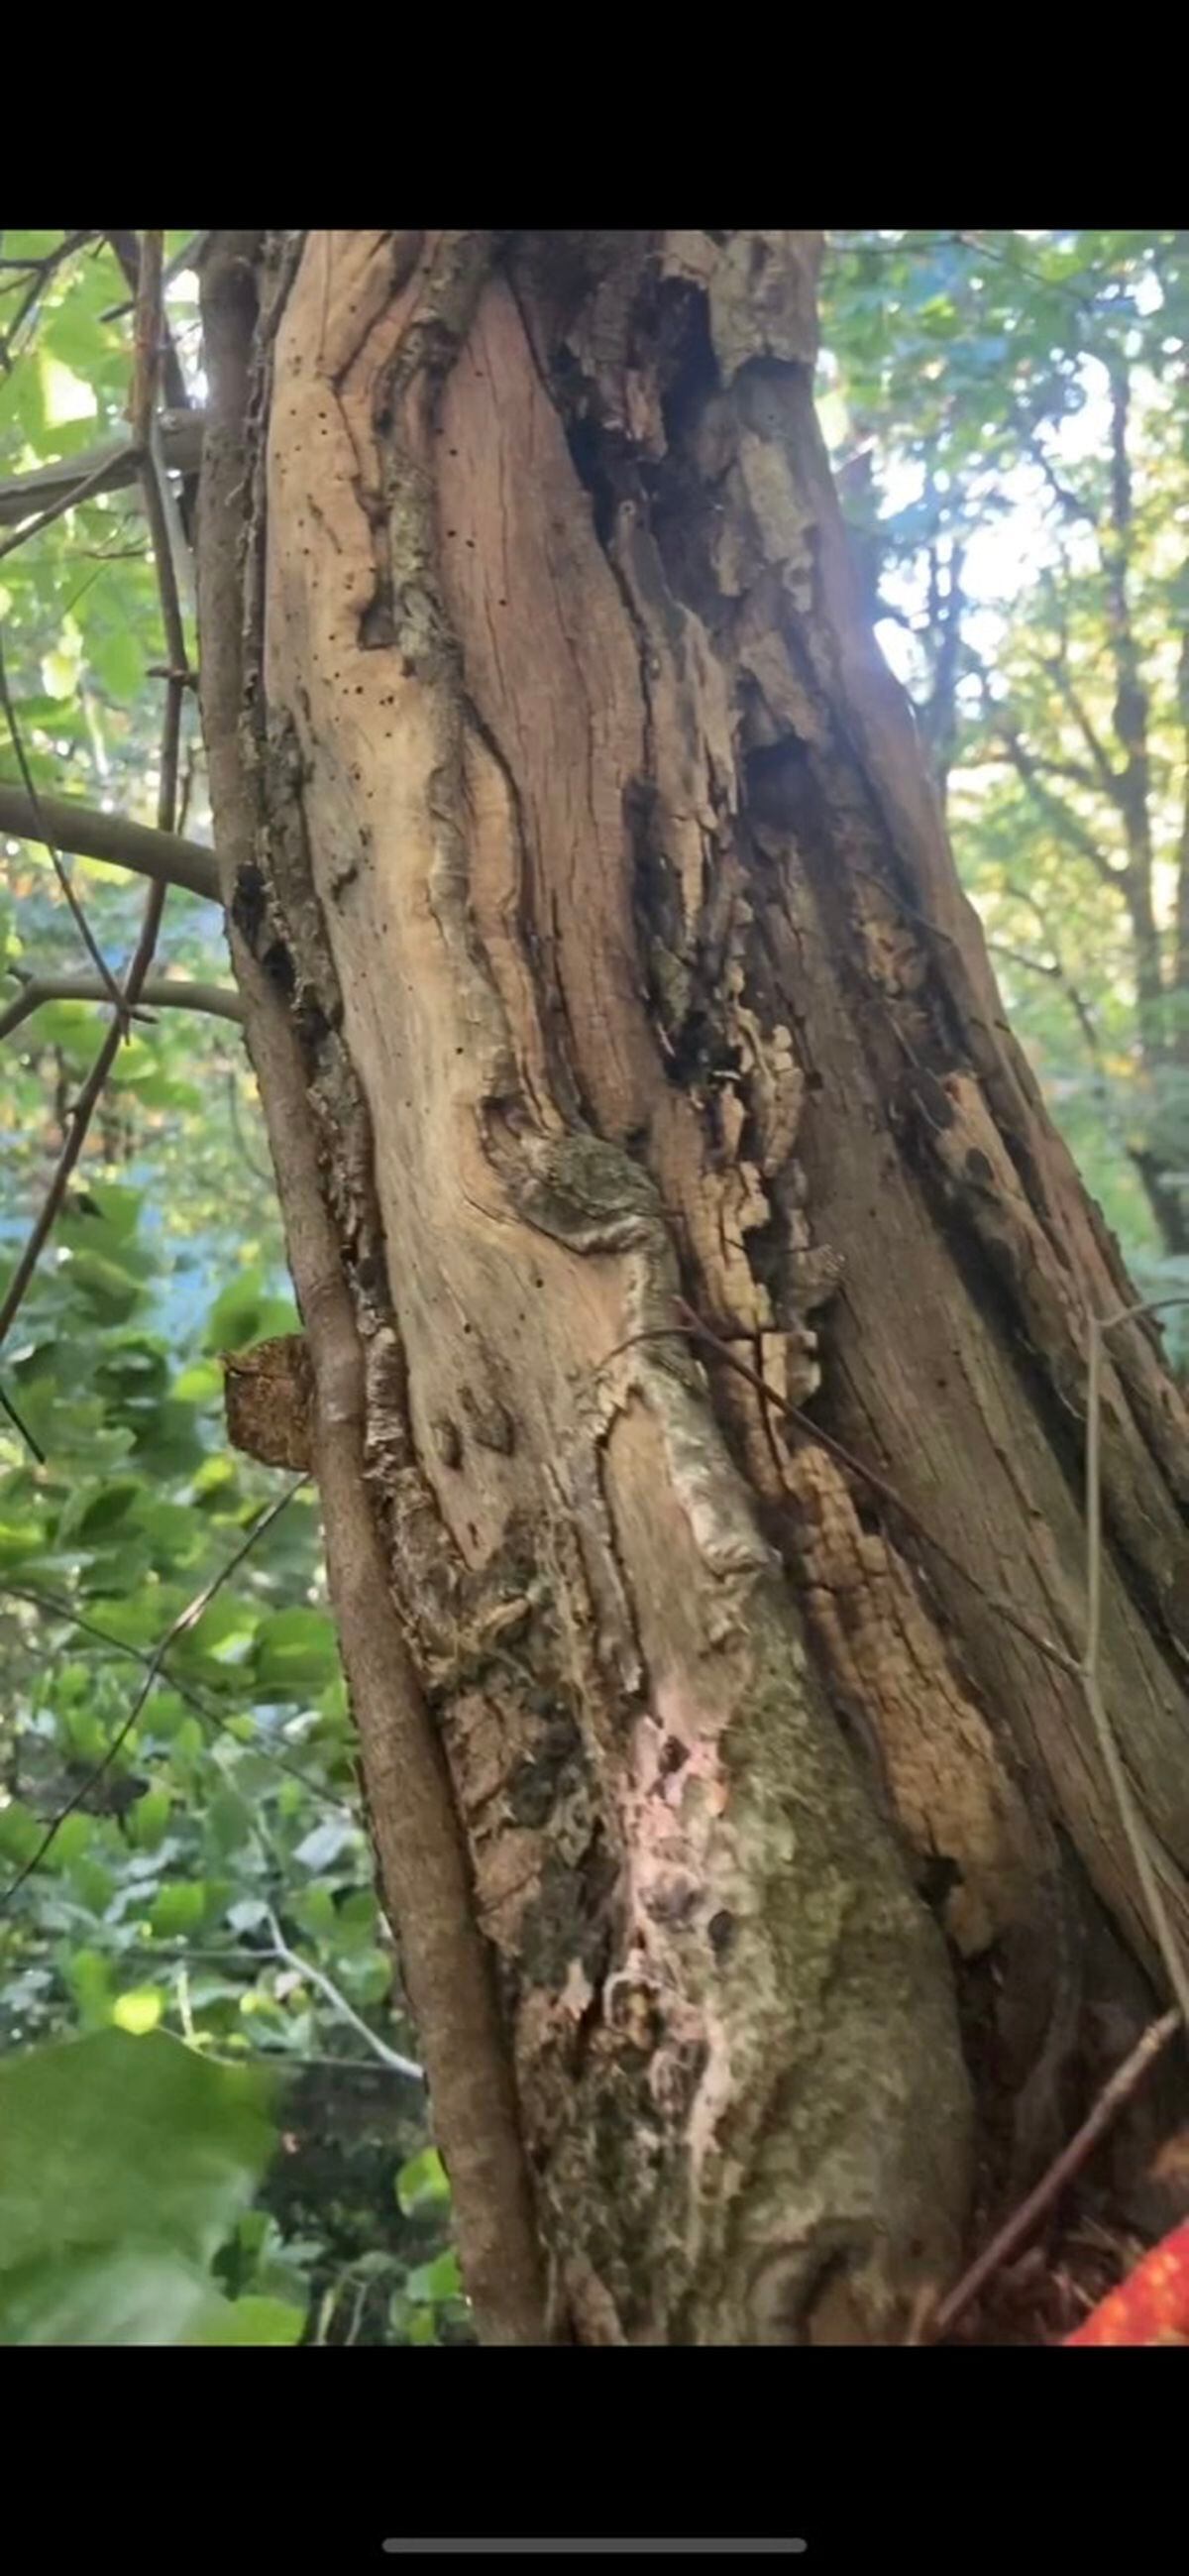 Damage caused by the squirrels shown in images from the Severn Gorge Countryside Trust